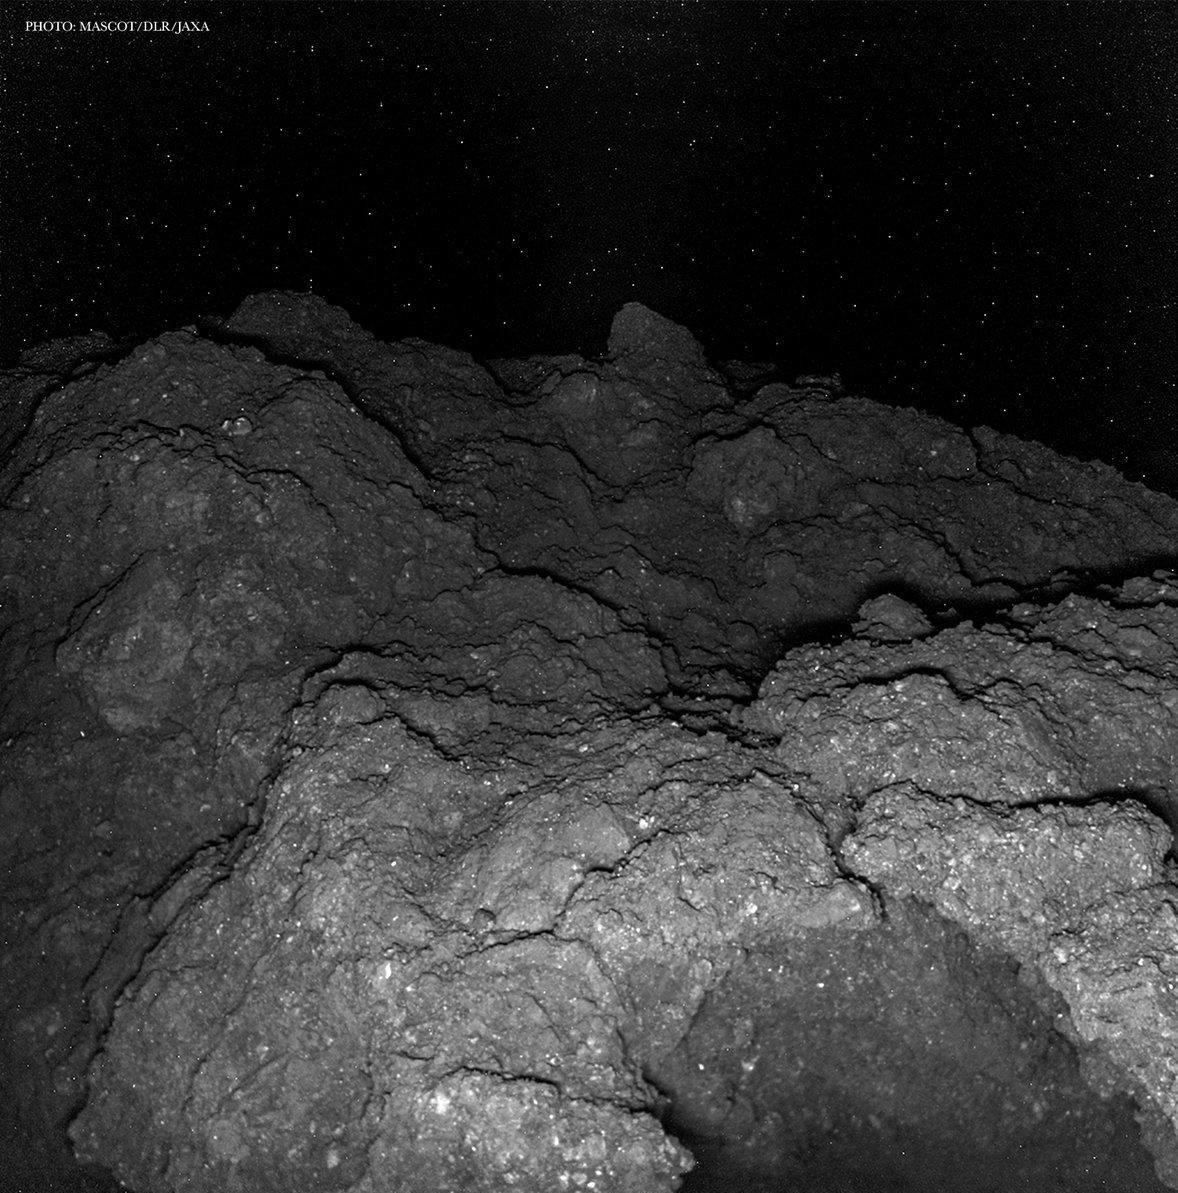 This is an image of the surface of the asteroid, Ryugu. It was taken by the Japanese Hayabusa 2 space craft.jpg